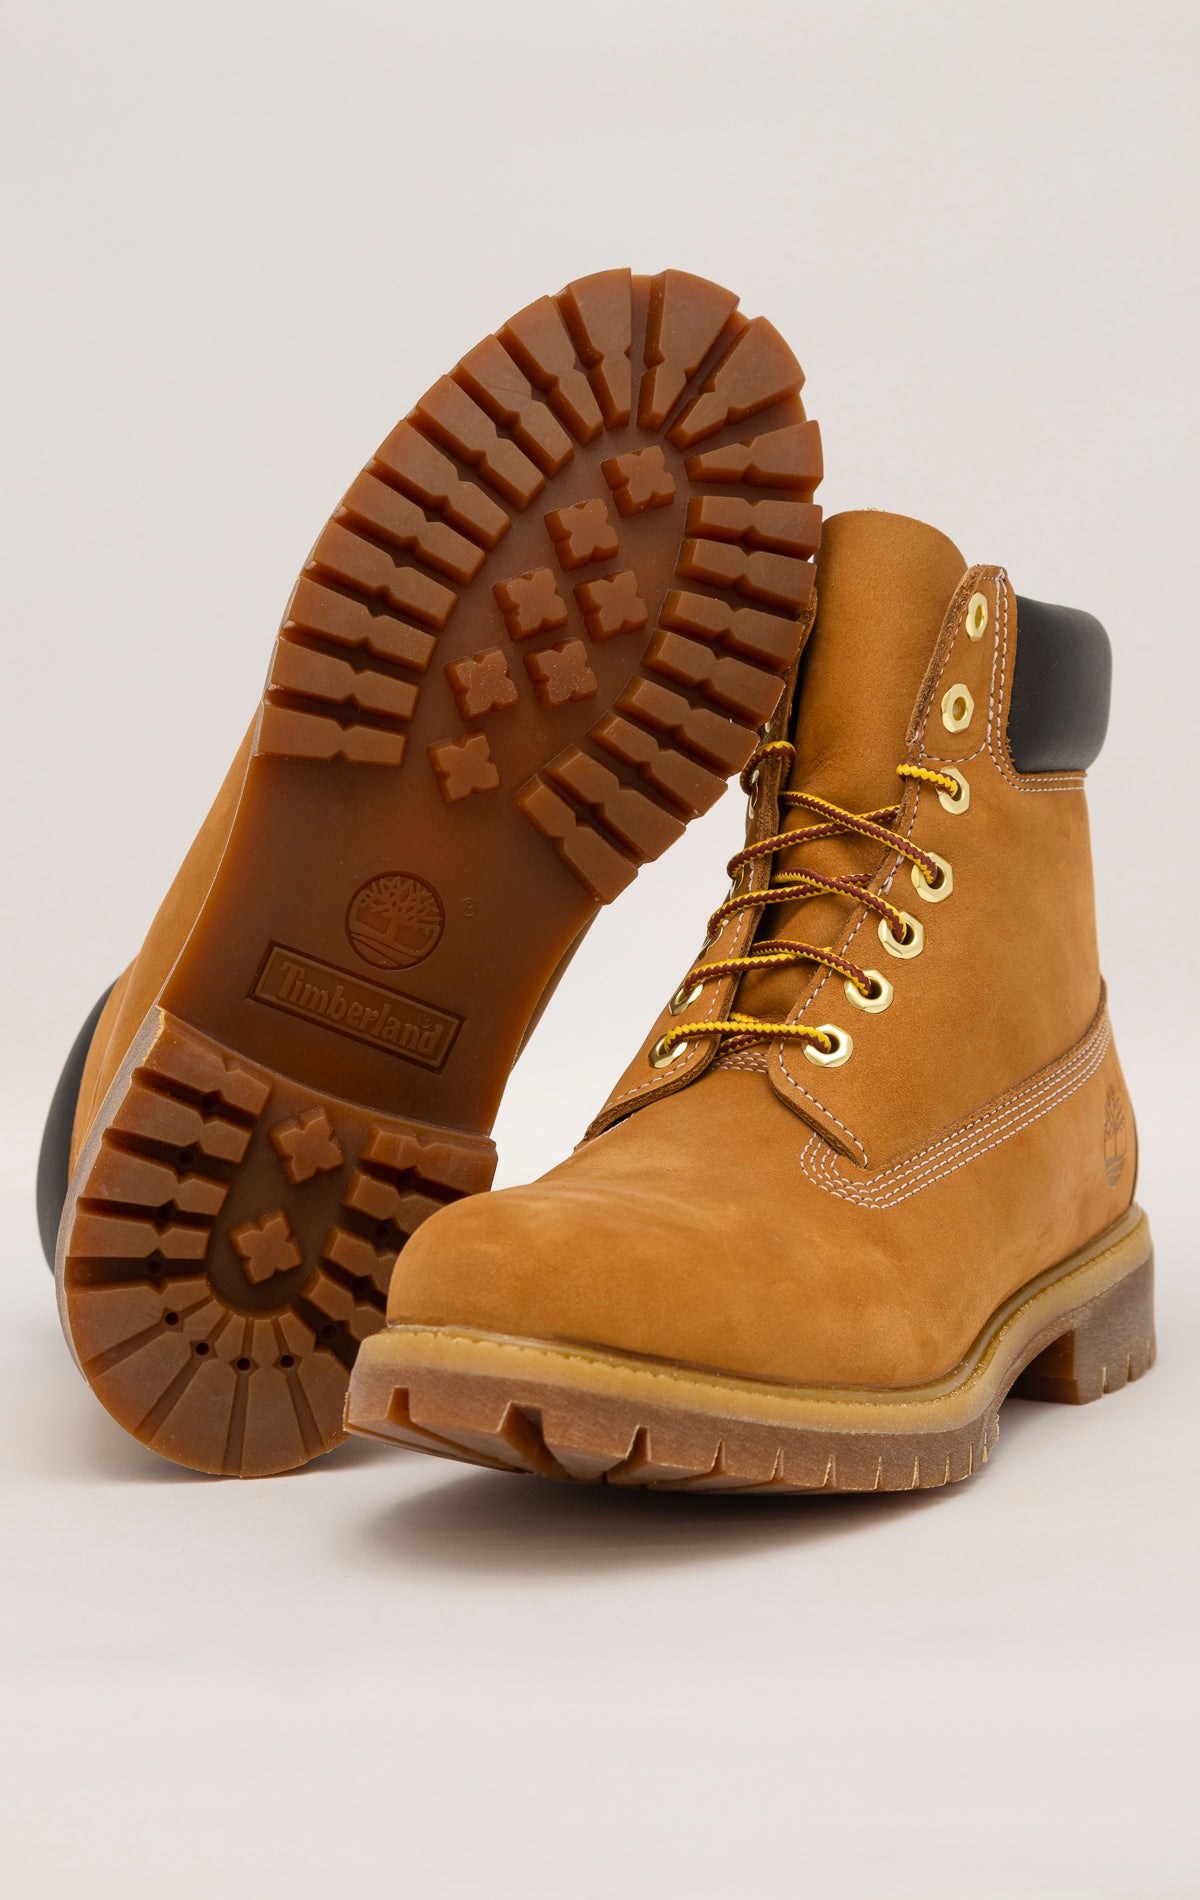 Timberland 6-Inch boots in premium wheat nubuck leather with waterproof construction, padded collar, and lug outsole